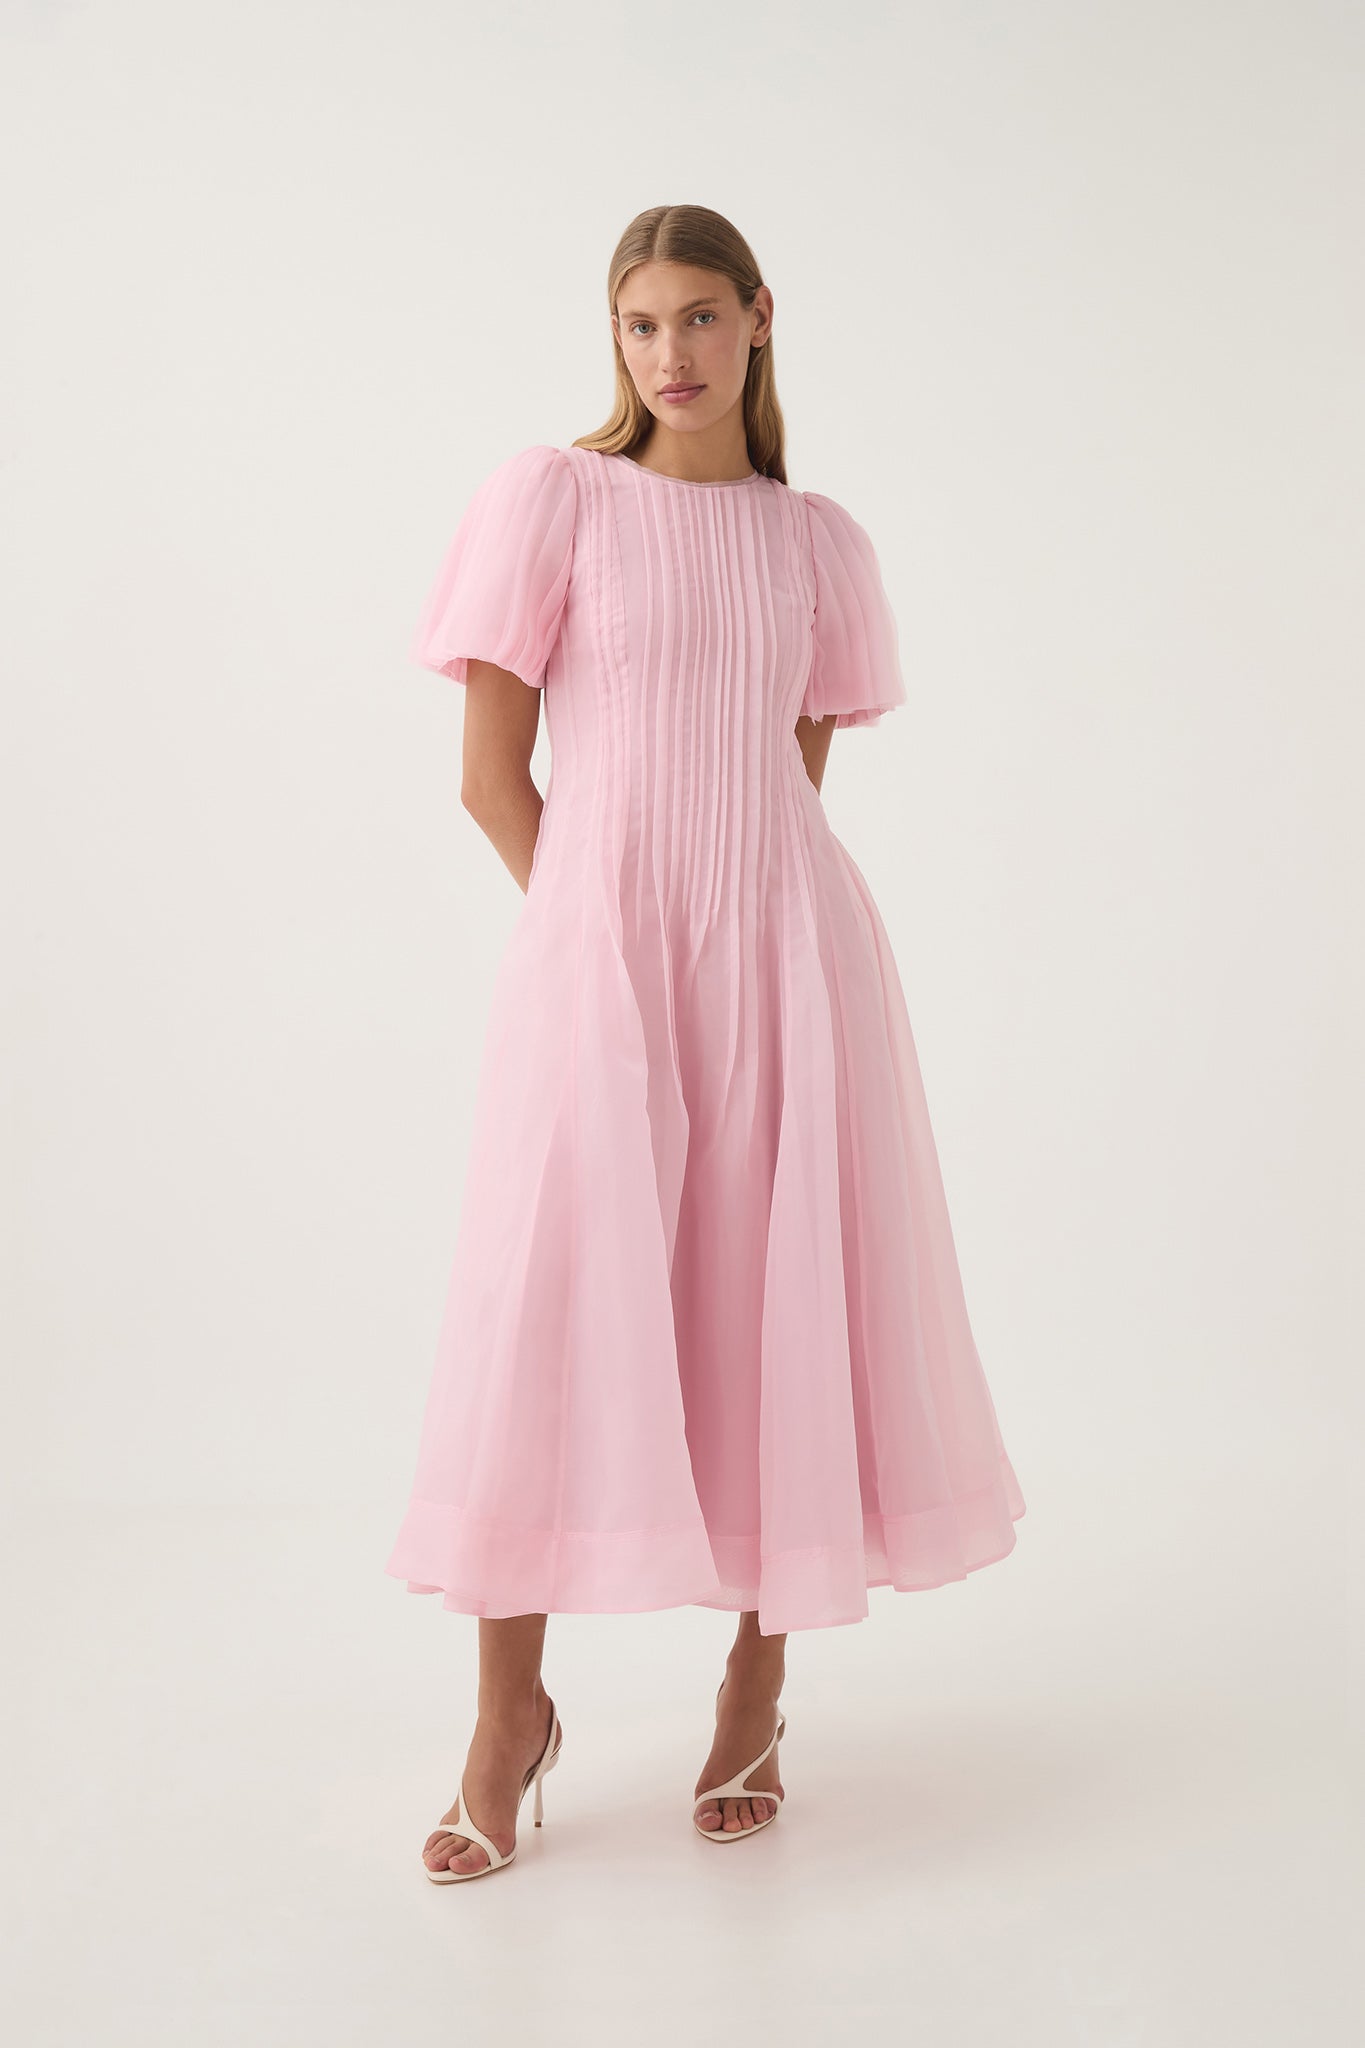 Formal Event Pleated Dress Styling